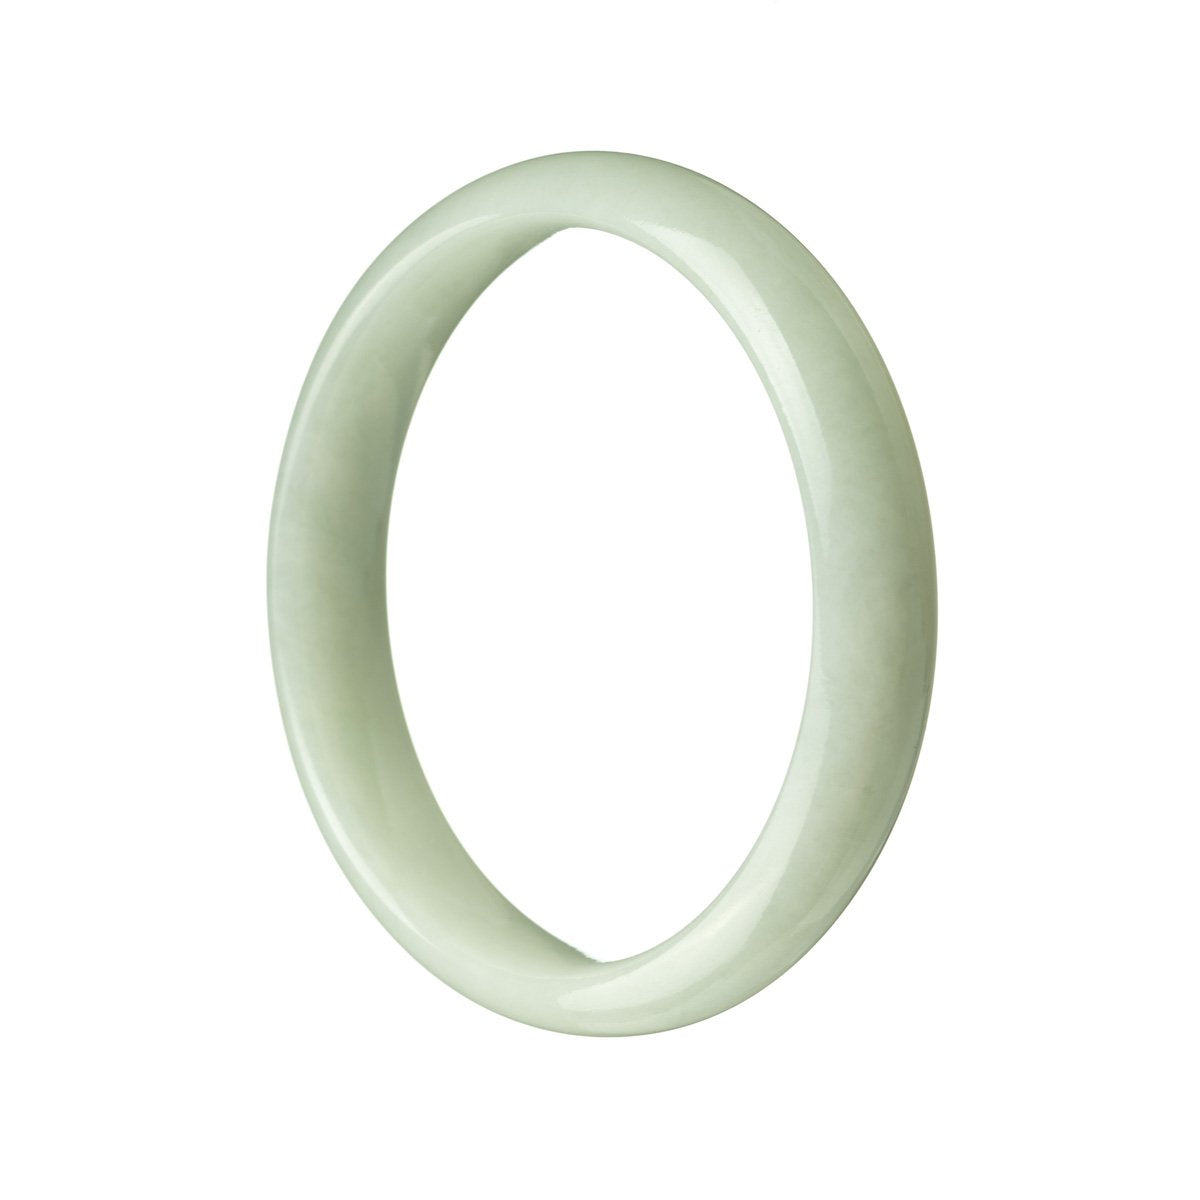 A pale green jadeite bangle bracelet with a semi-round shape, measuring 56mm in diameter.